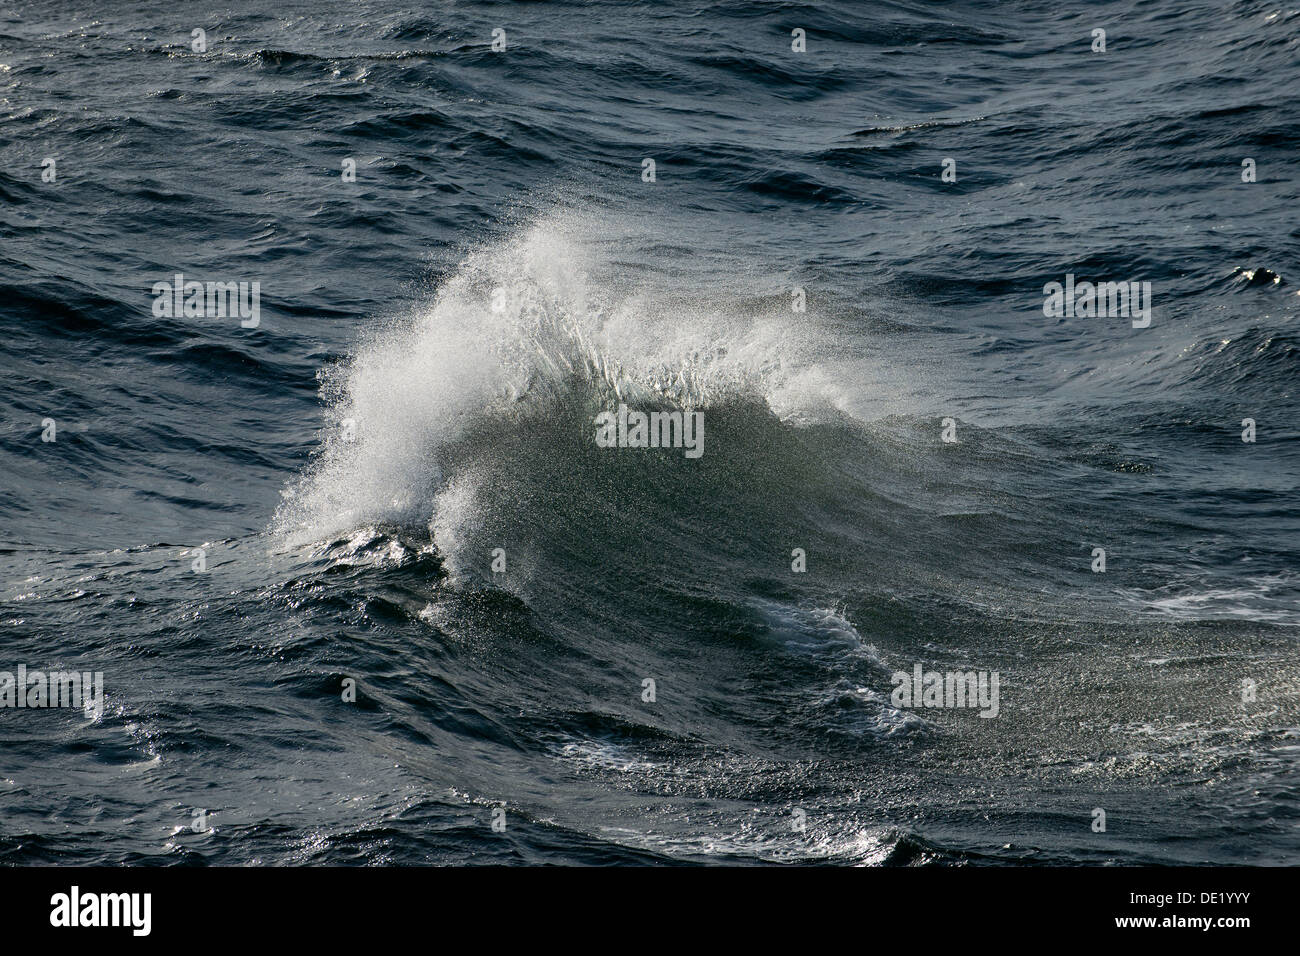 Wave with spray, on the high seas, Baltic Sea, Germany Stock Photo